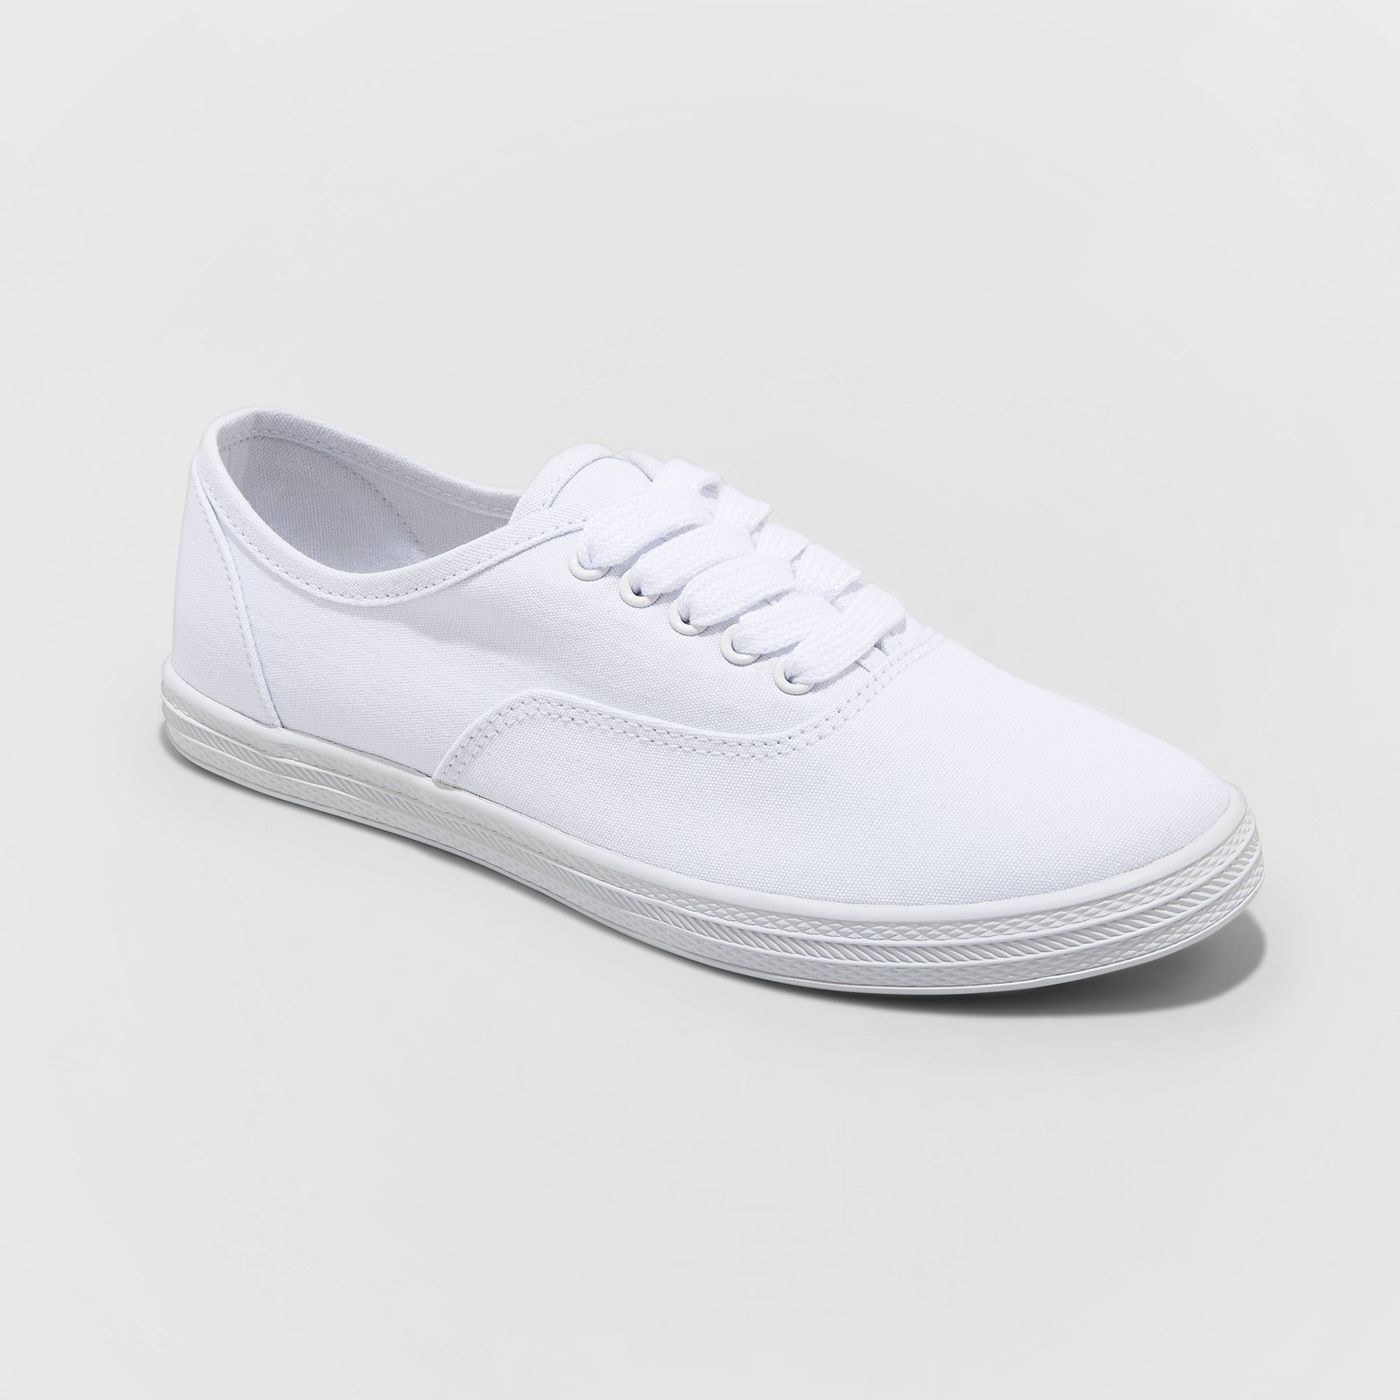 All white sneakers with laces and rubber sole